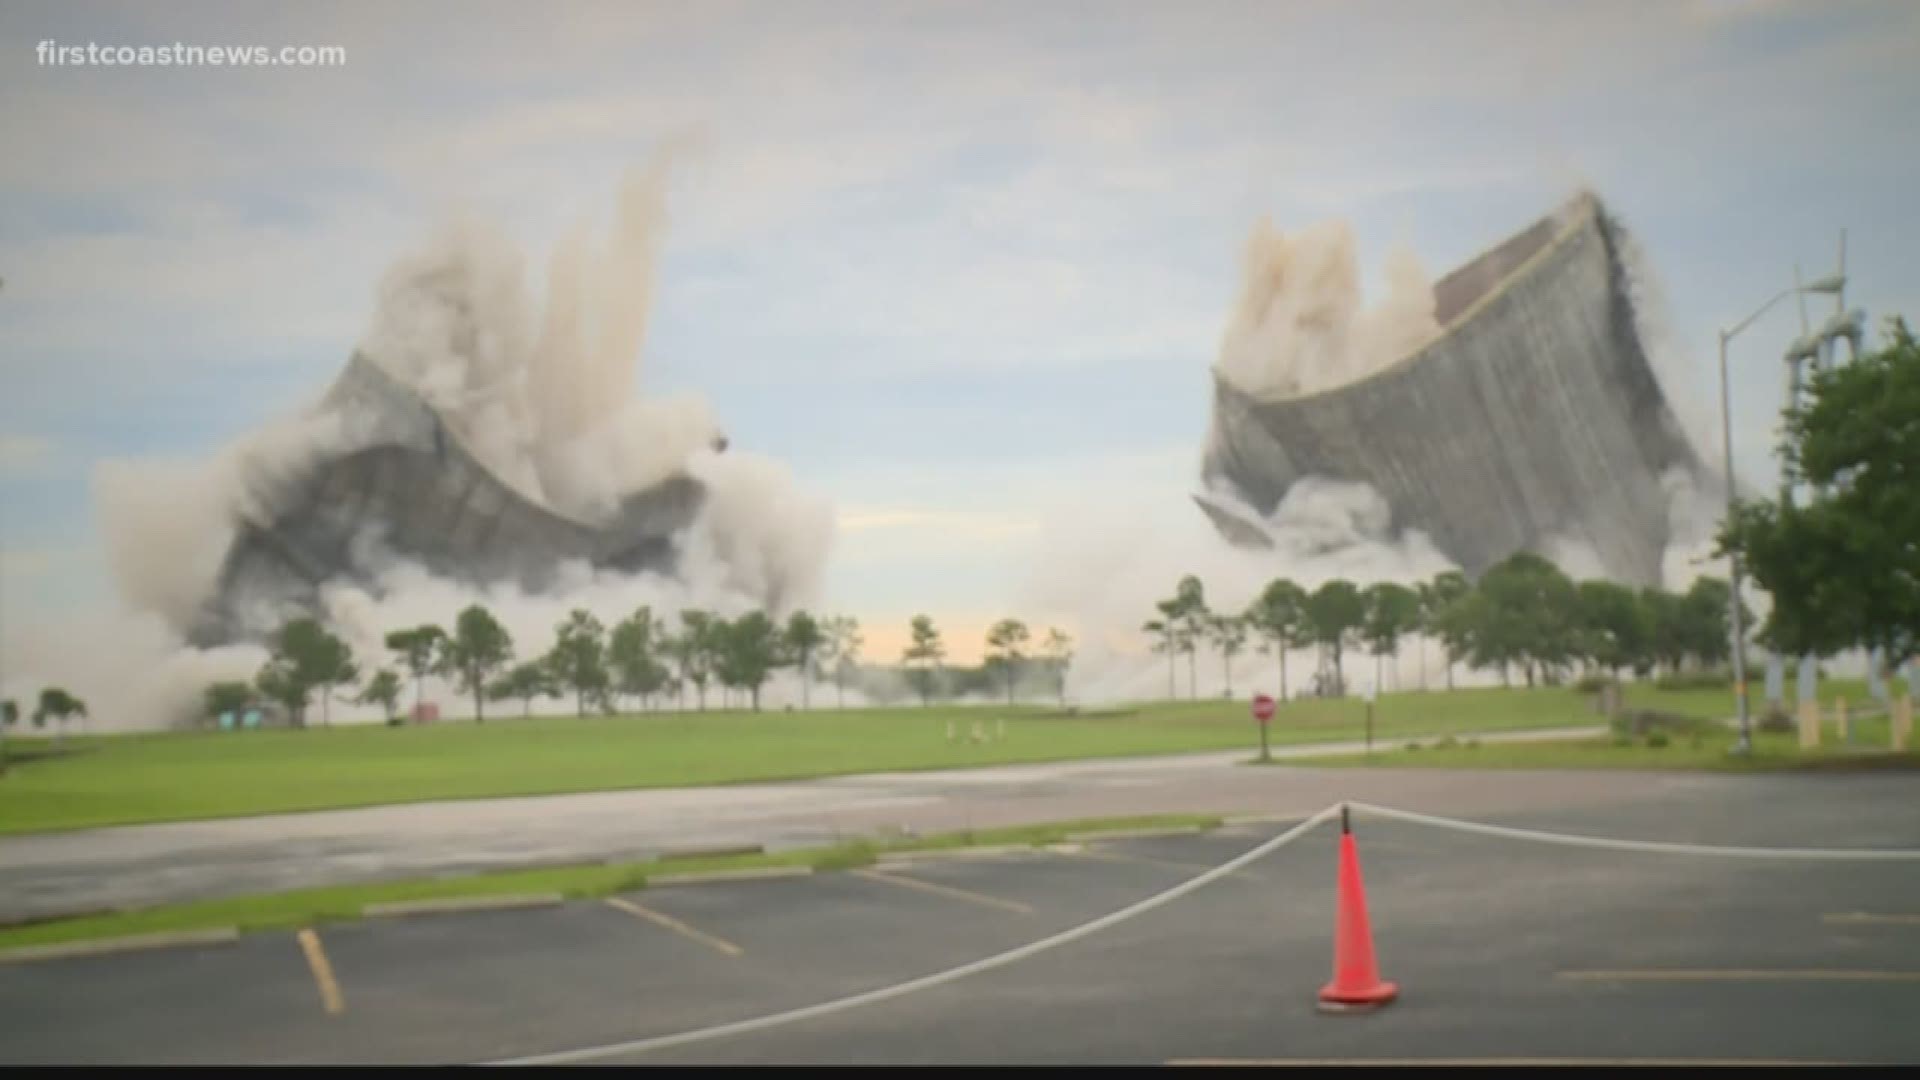 The cooling towers were around since the 1980s. Its implosion is just the beginning of one of the largest demolition projects in the country.